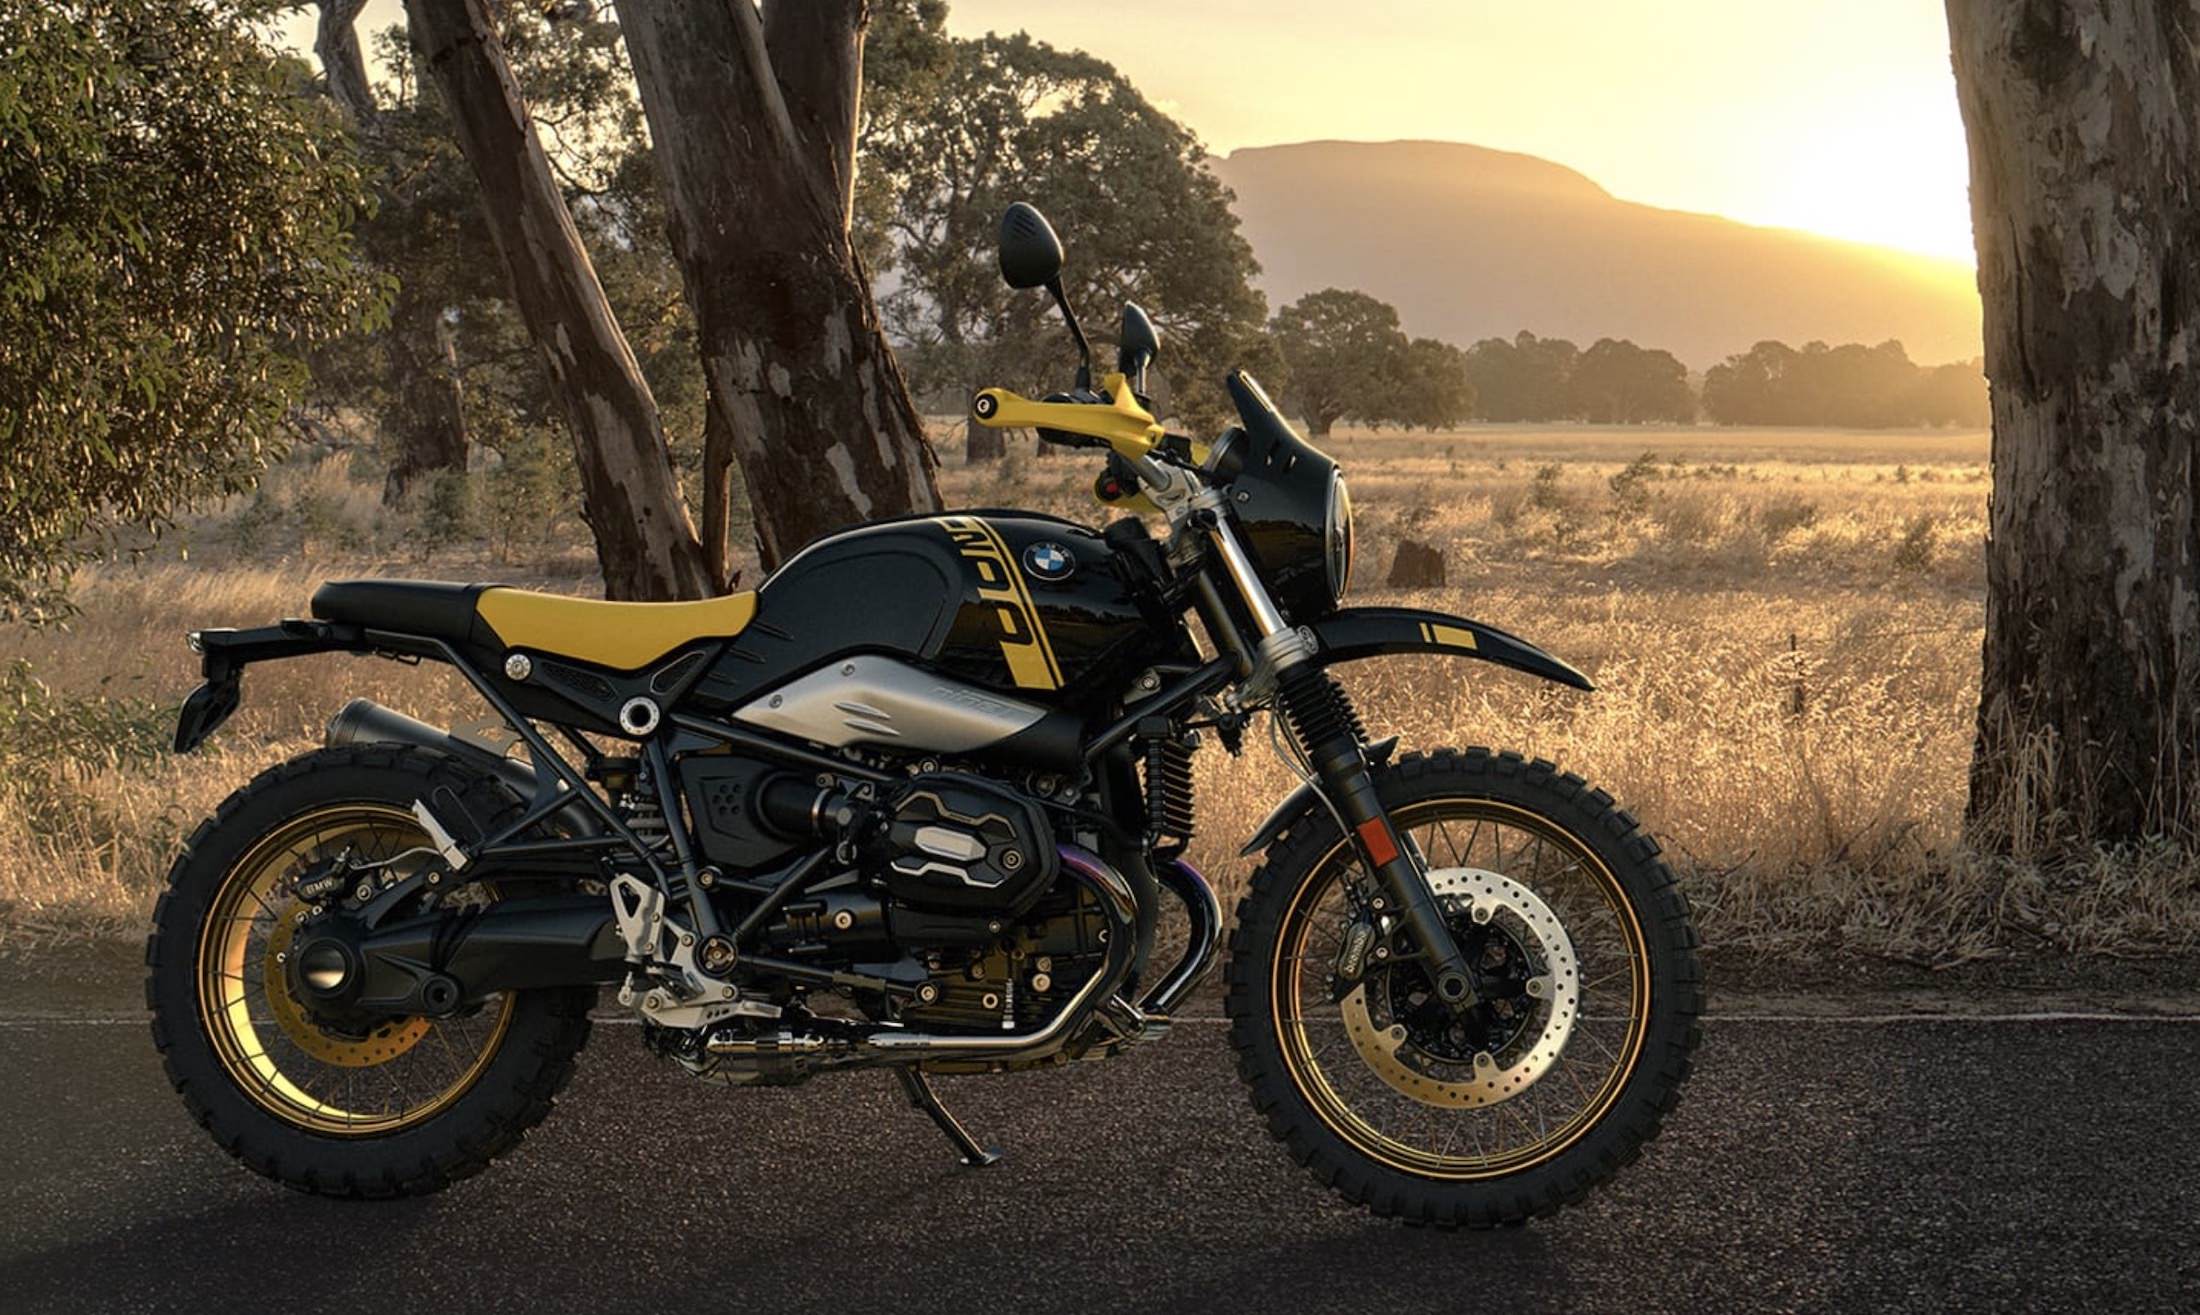 The New 21 Bmw R Ninet Urban G S Limited Edition 40 Years Gs